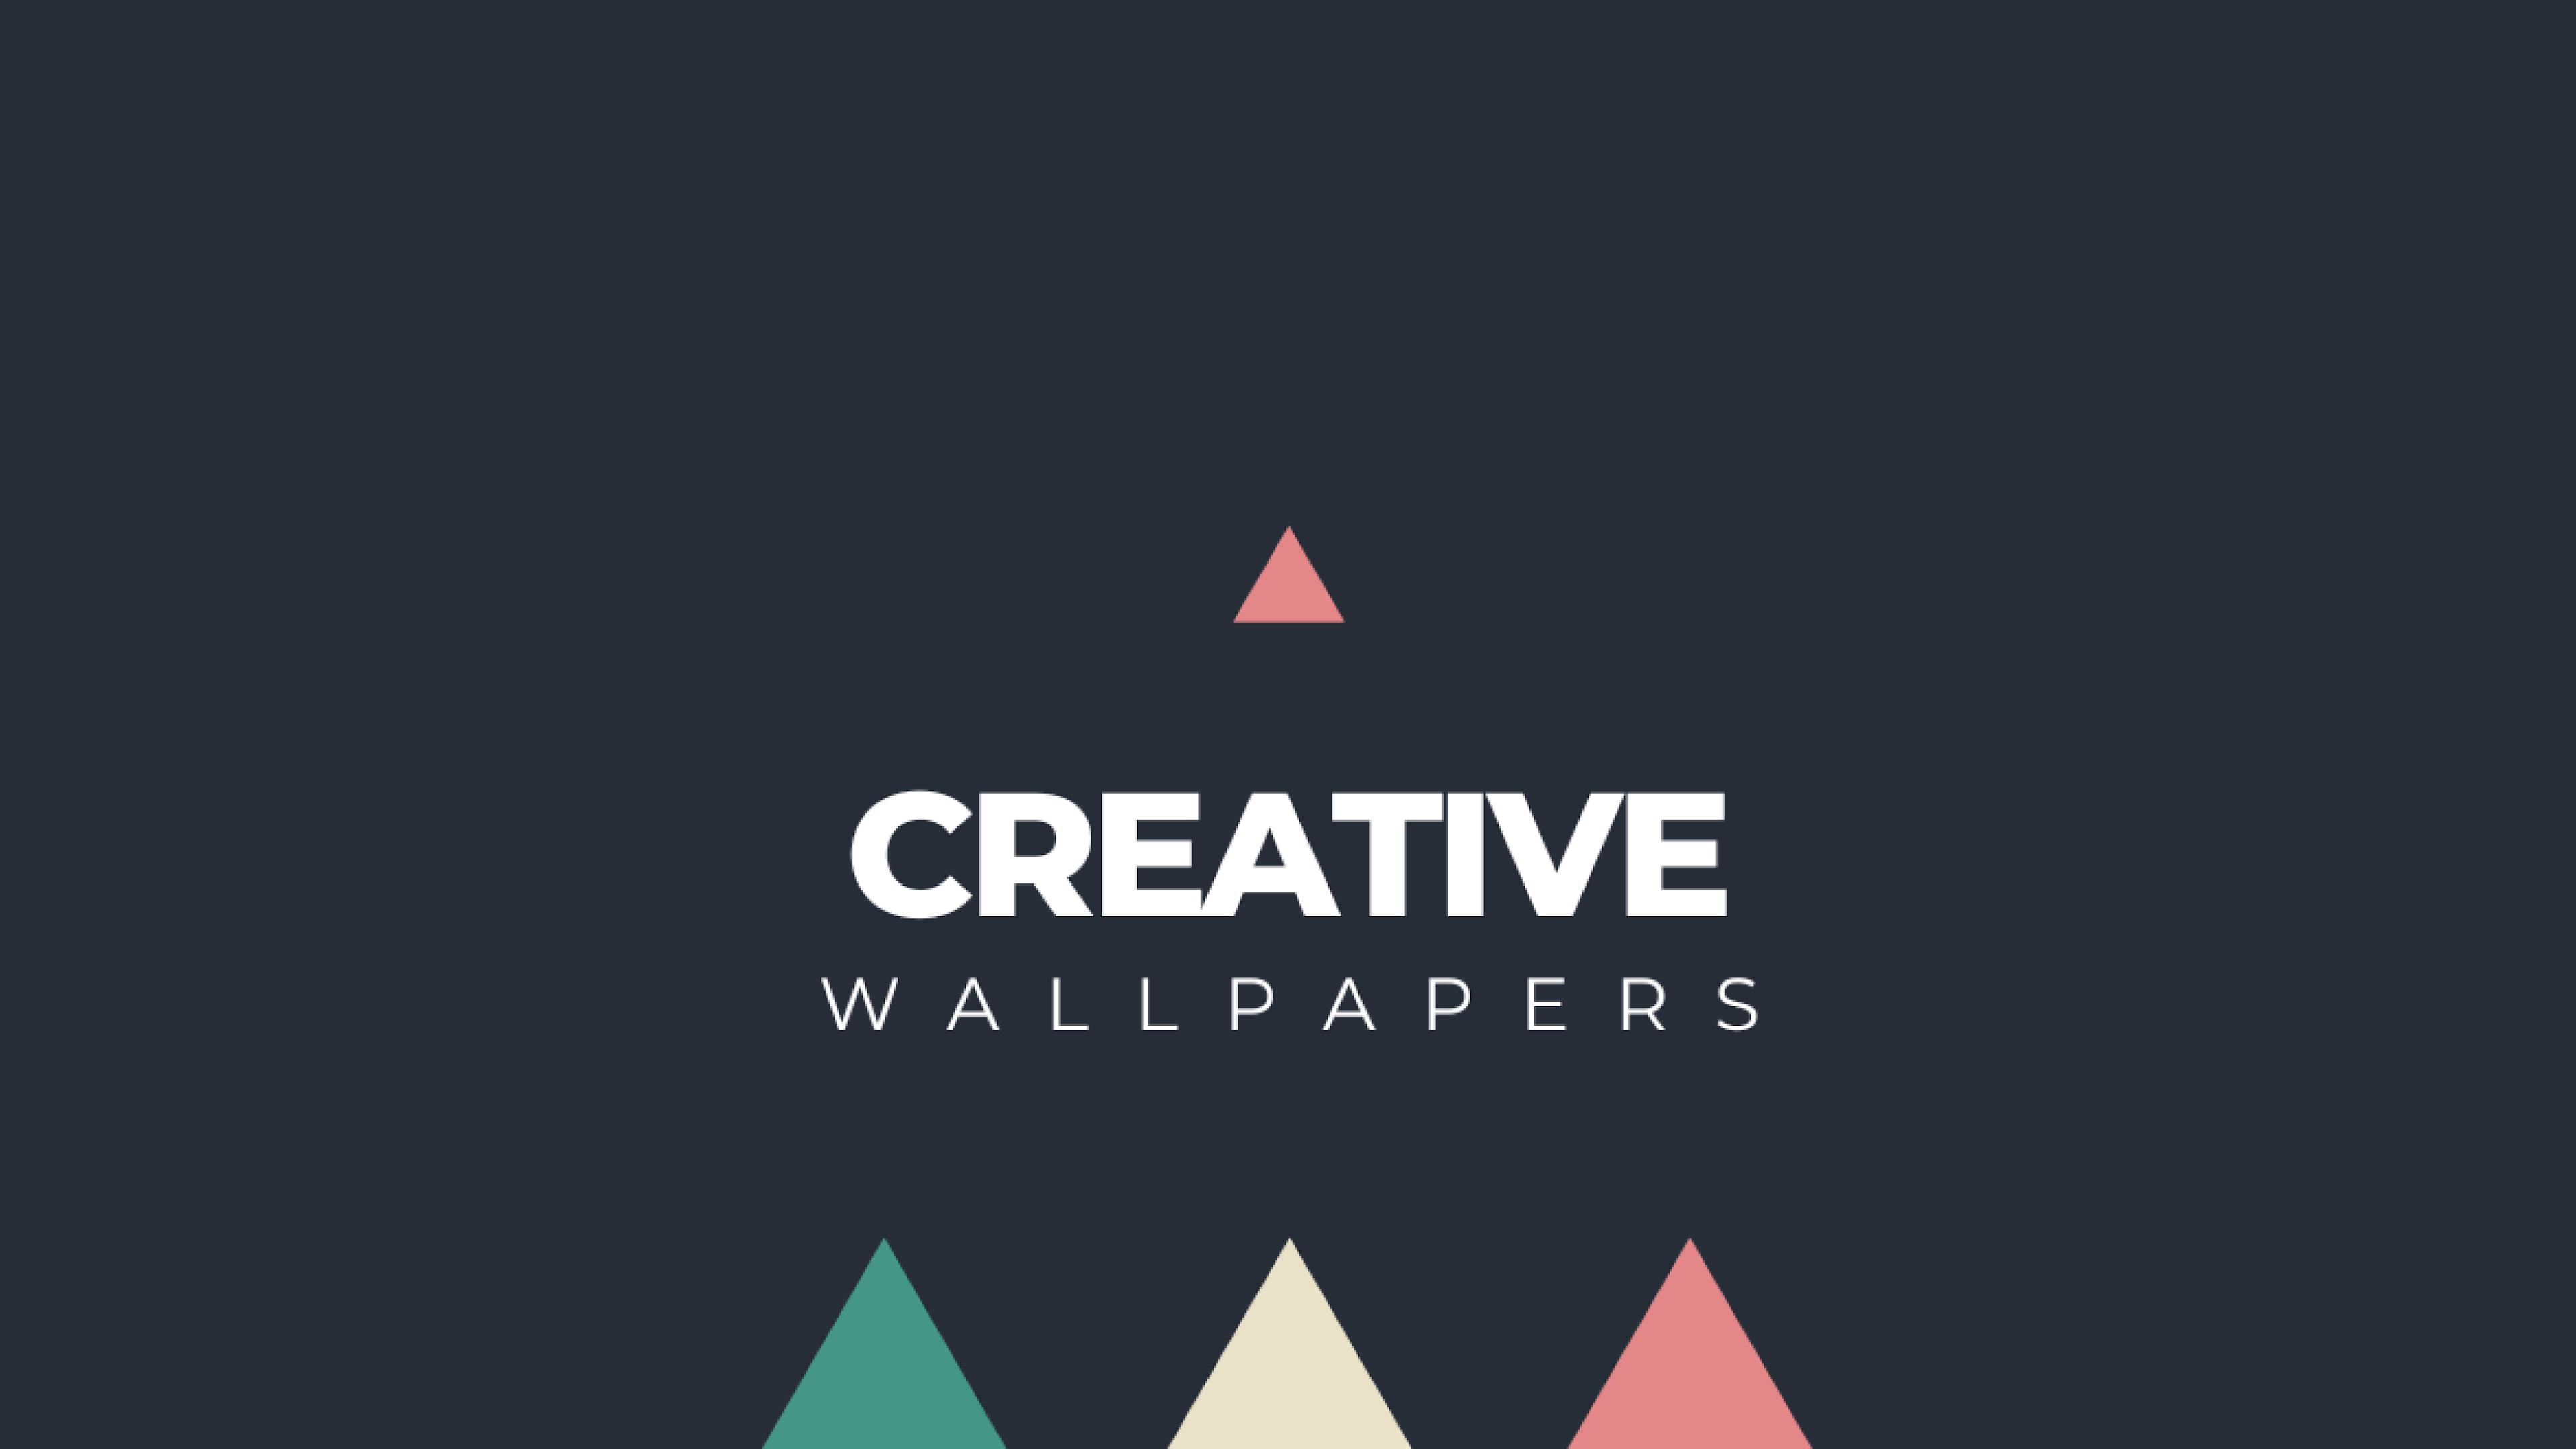 HD Wallpapers (Backgrounds) - Apps on Google Play